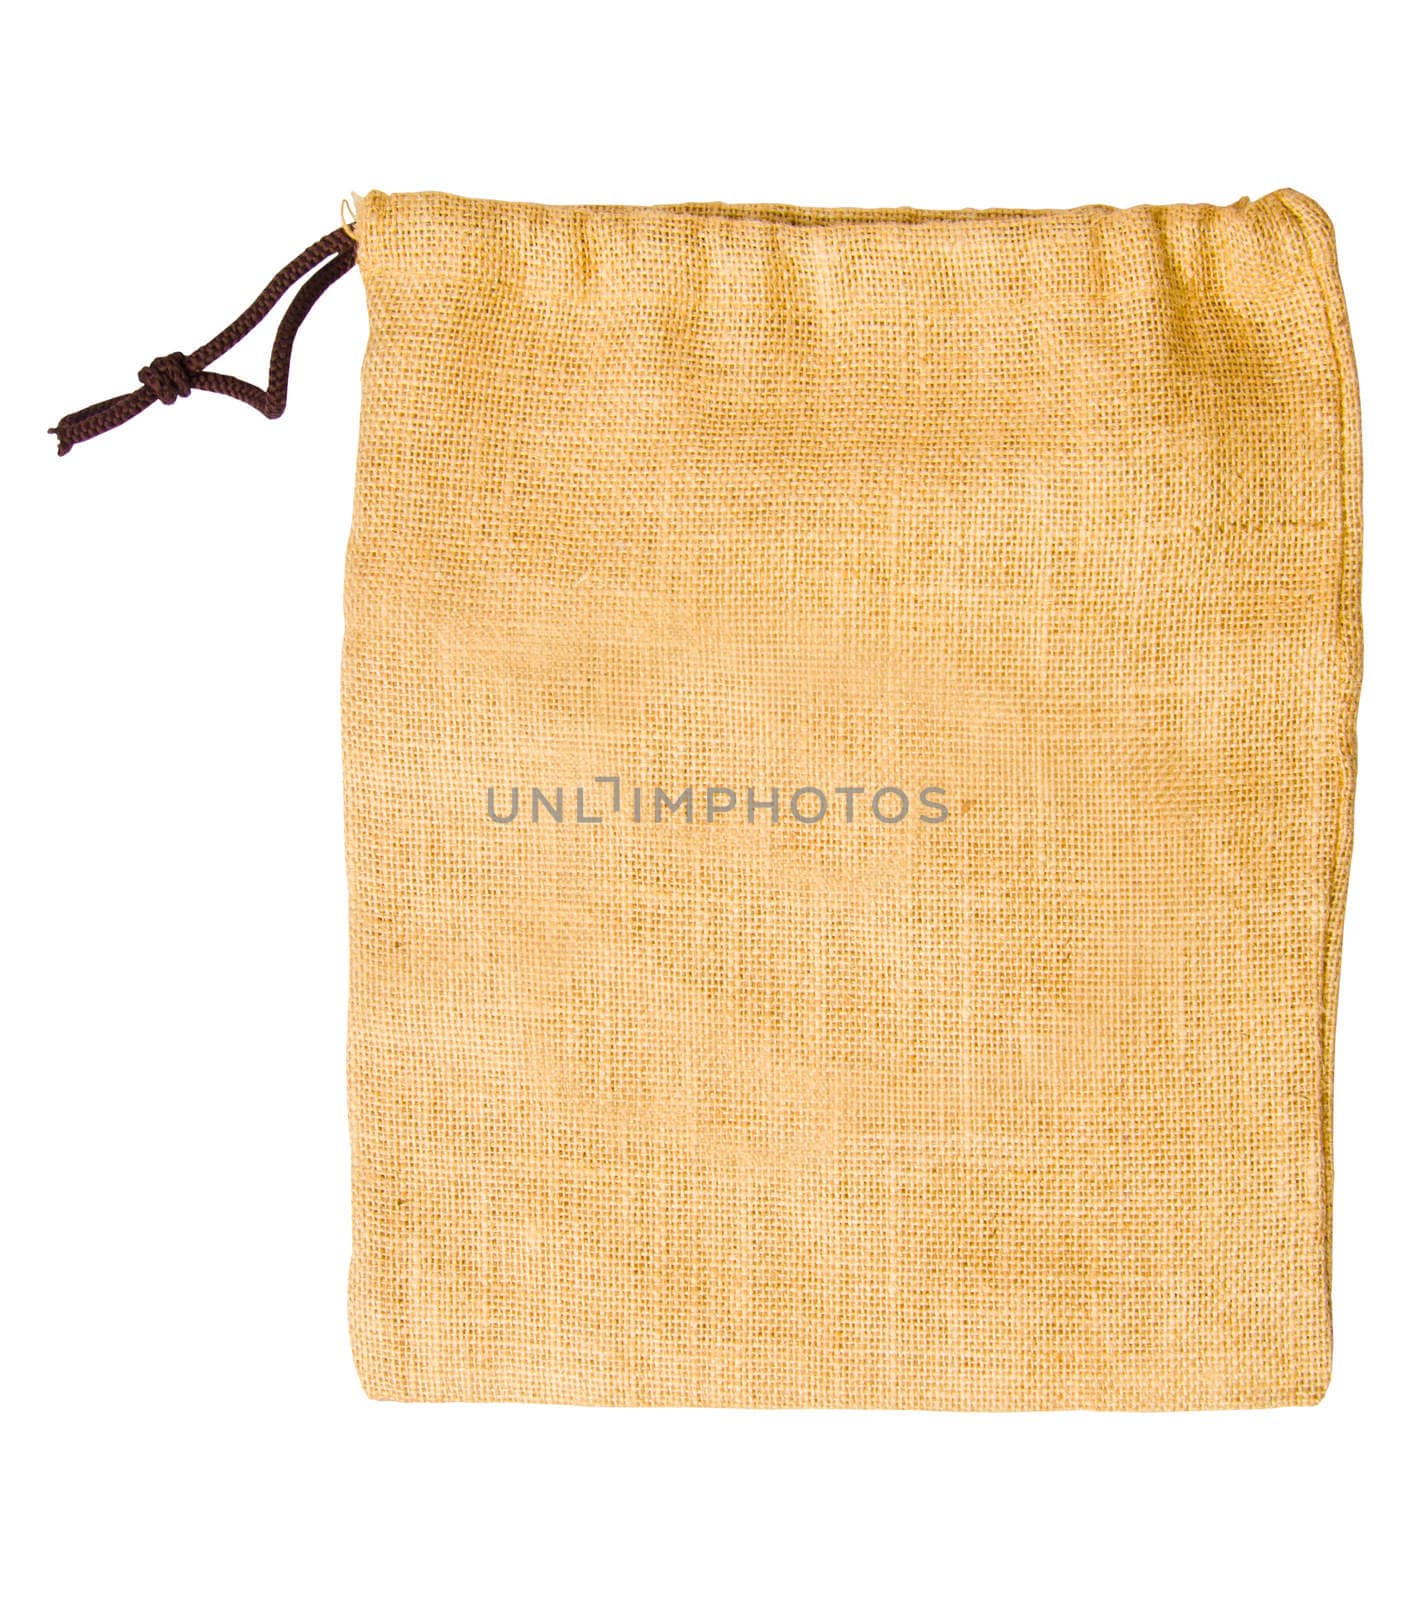 Empty sack bag isolated on white background, clipping path